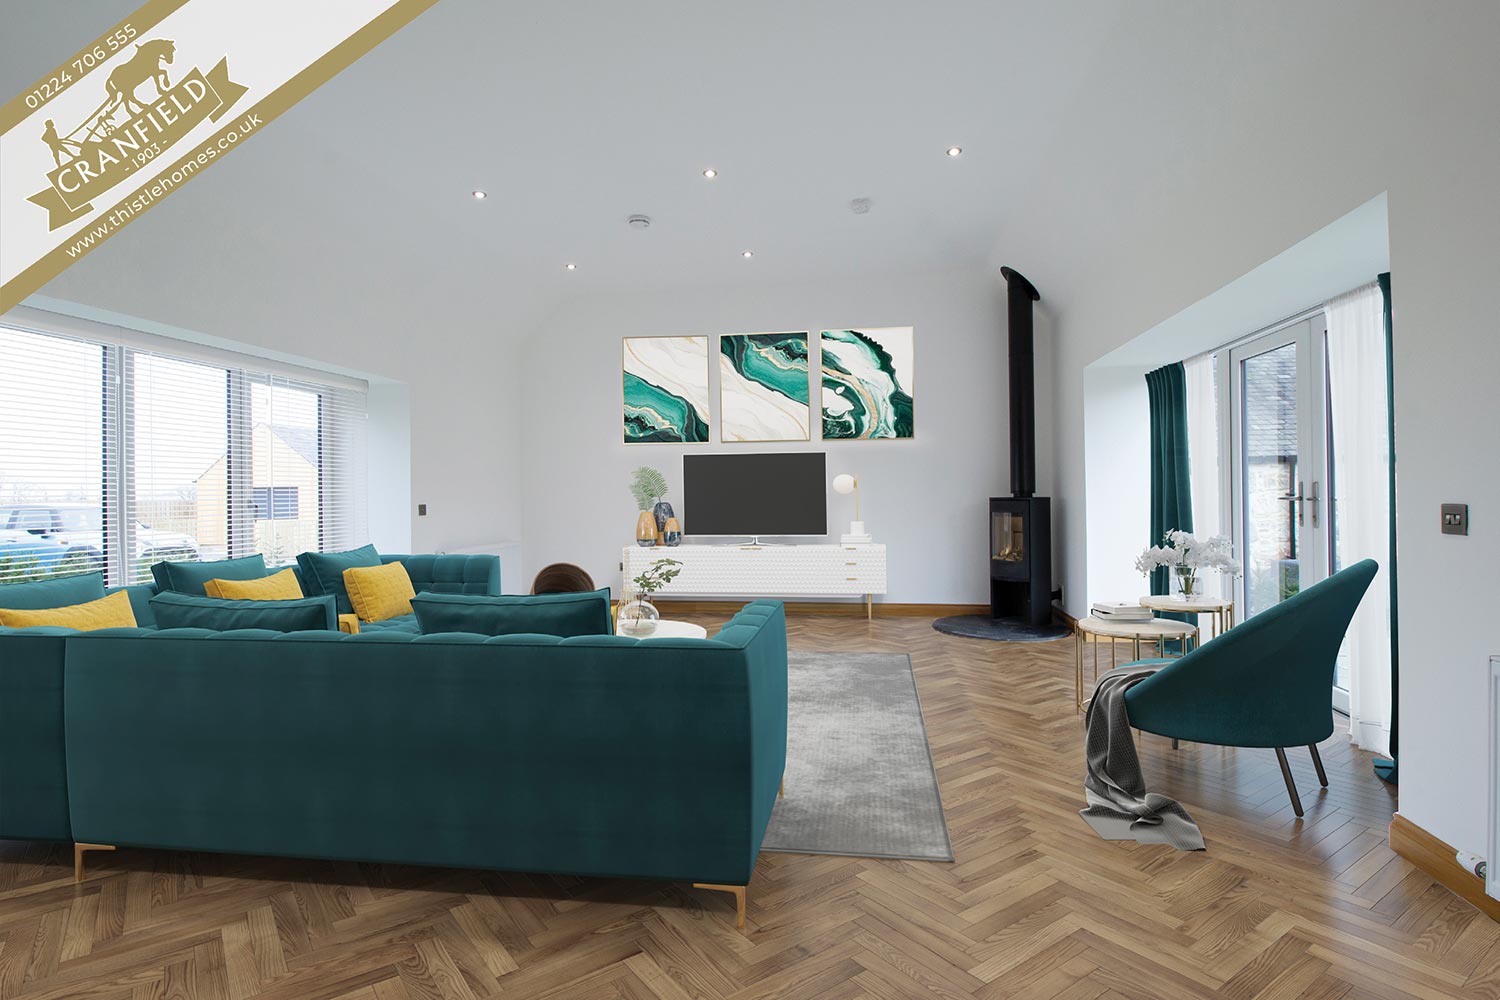 Cranfield by Thistle Homes Aberdeen: Plot 2 Kitchen/Dining/Lounge Area (Virtual Furnishing)